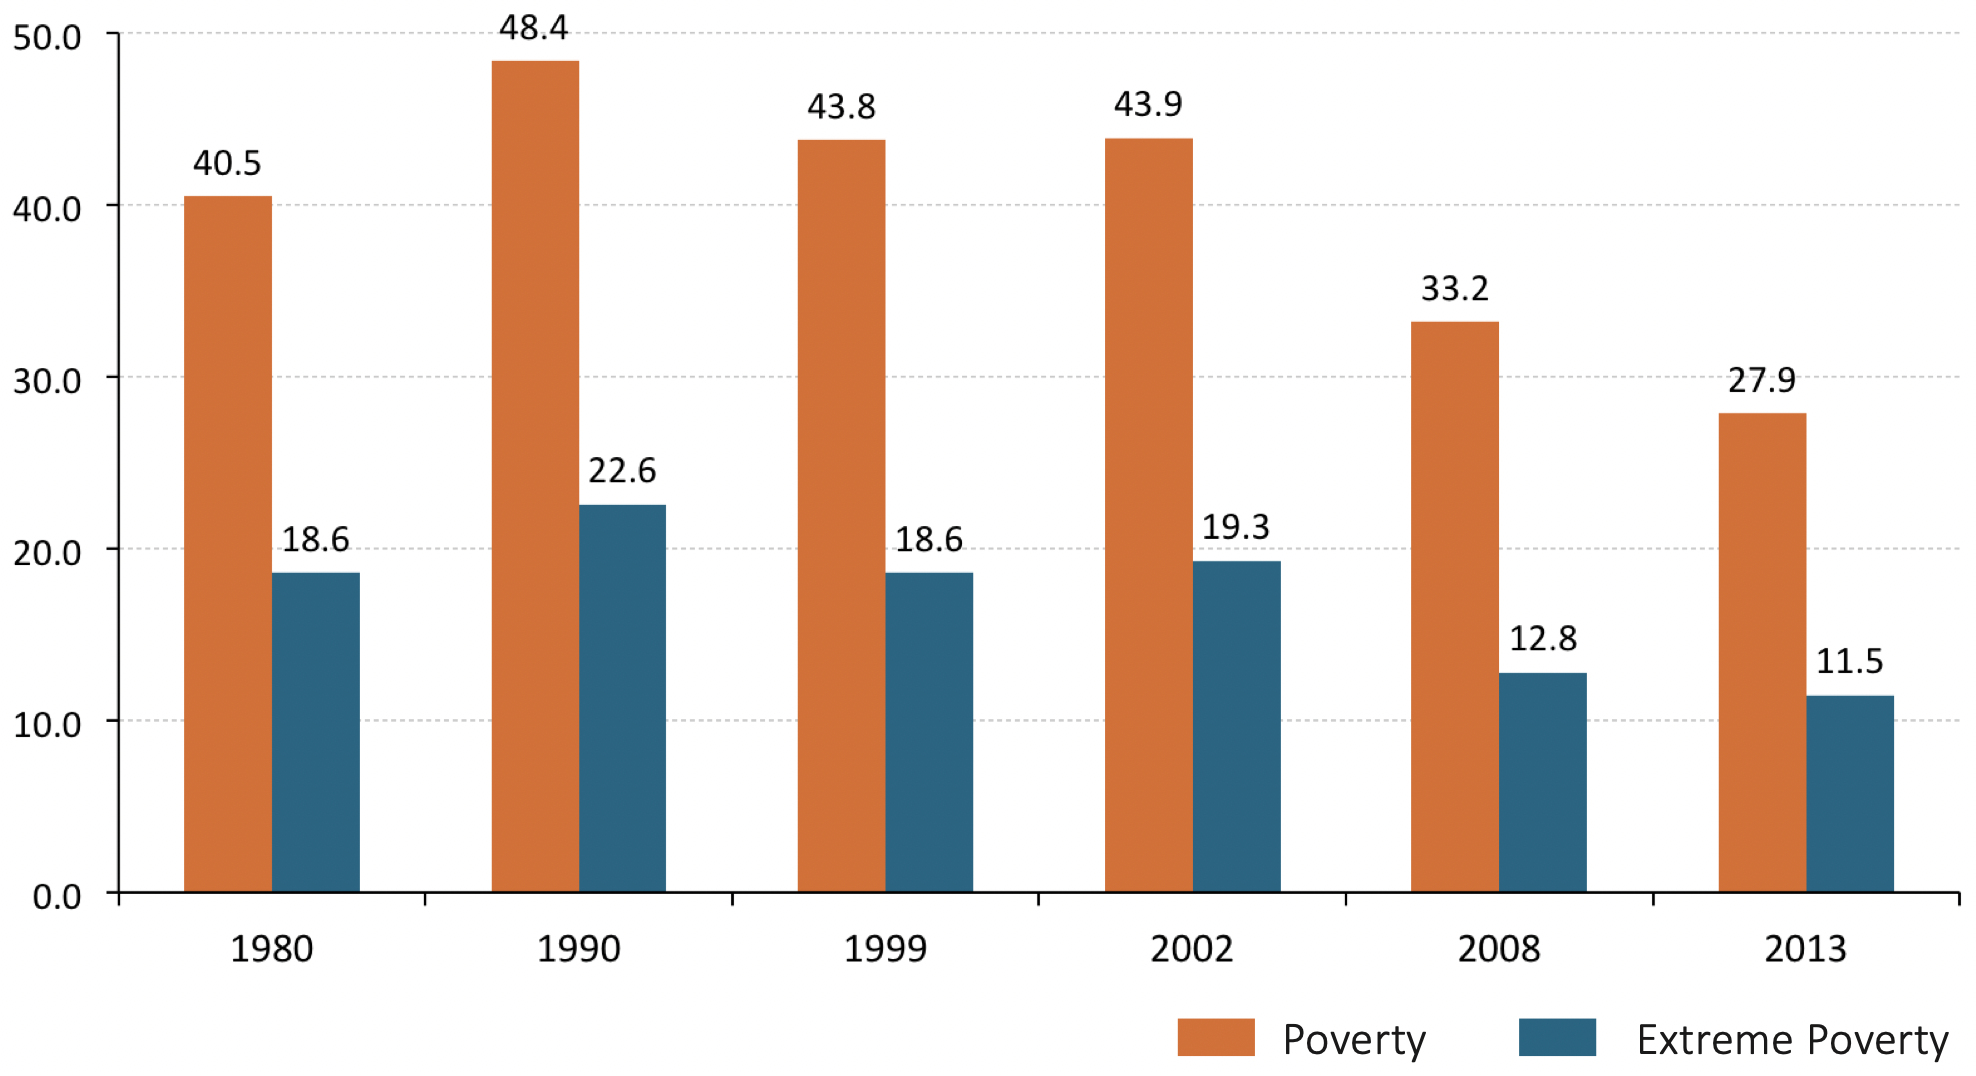 This graph compares poverty and extreme poverty in Latin America.